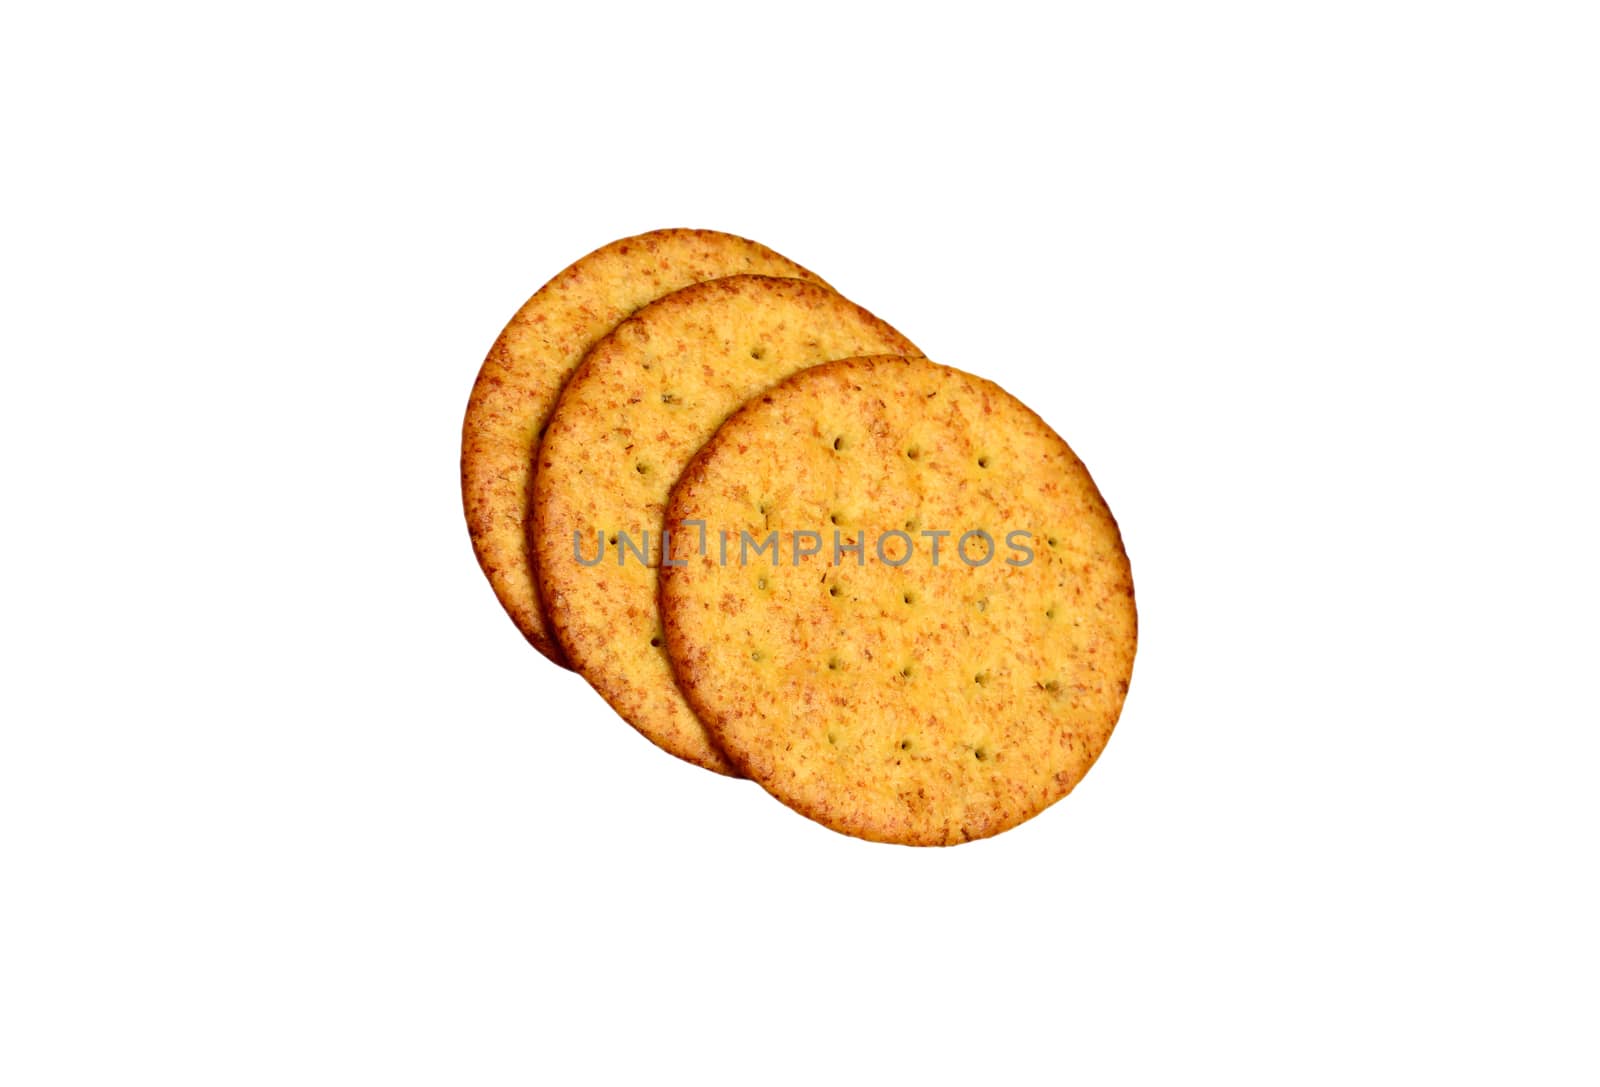 whole grain or whole wheat crackers isolated on white background